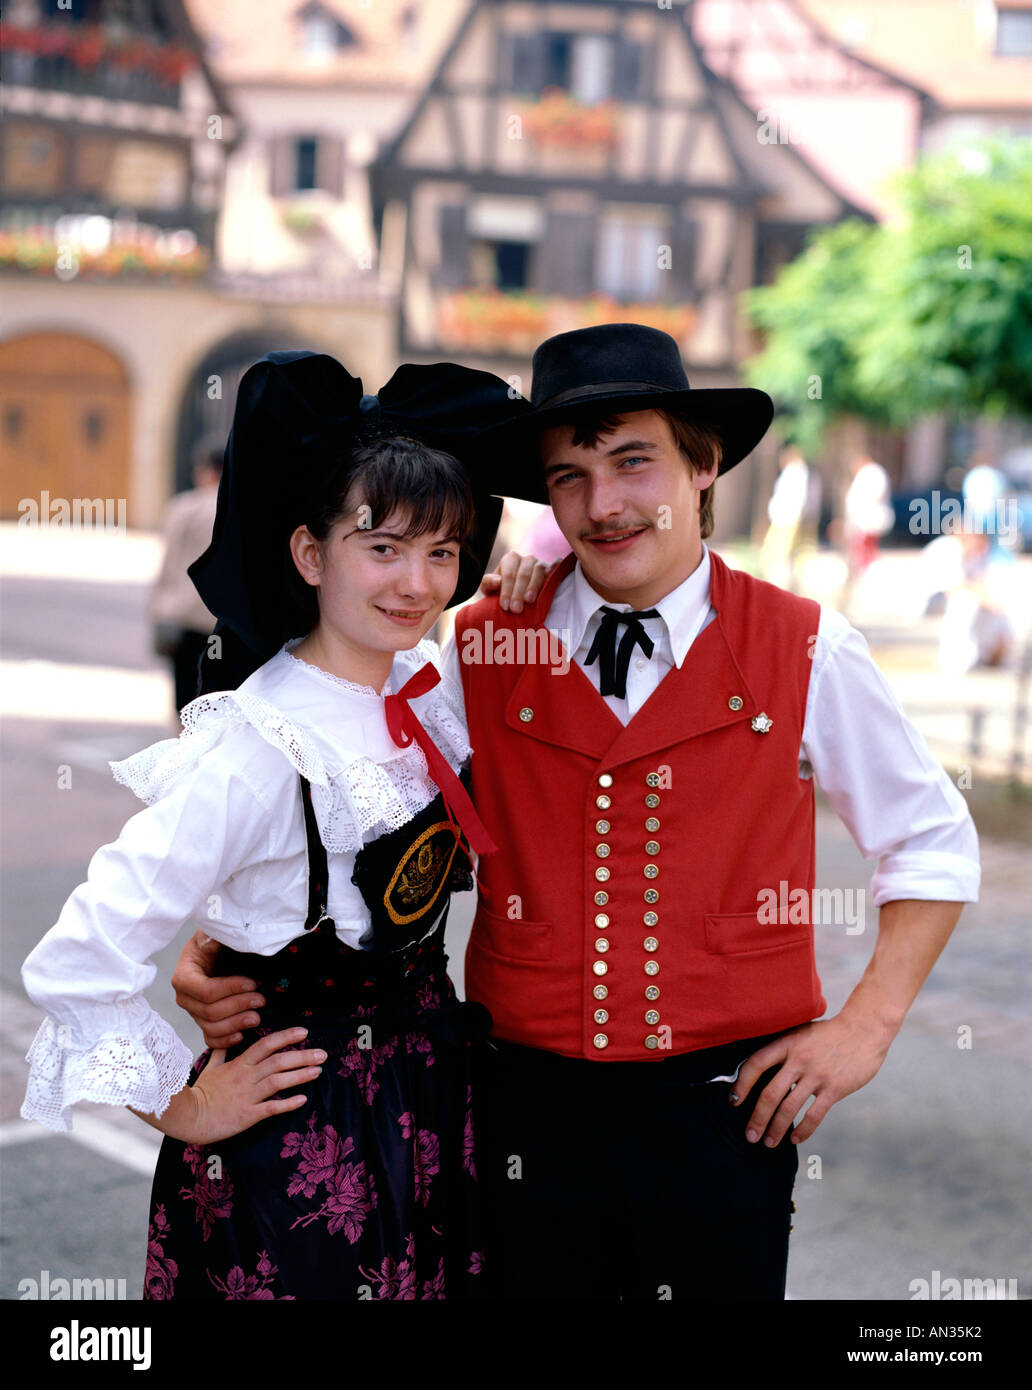 Couple Dressed in Regional Costume, Alsace, France Stock Photo - Alamy